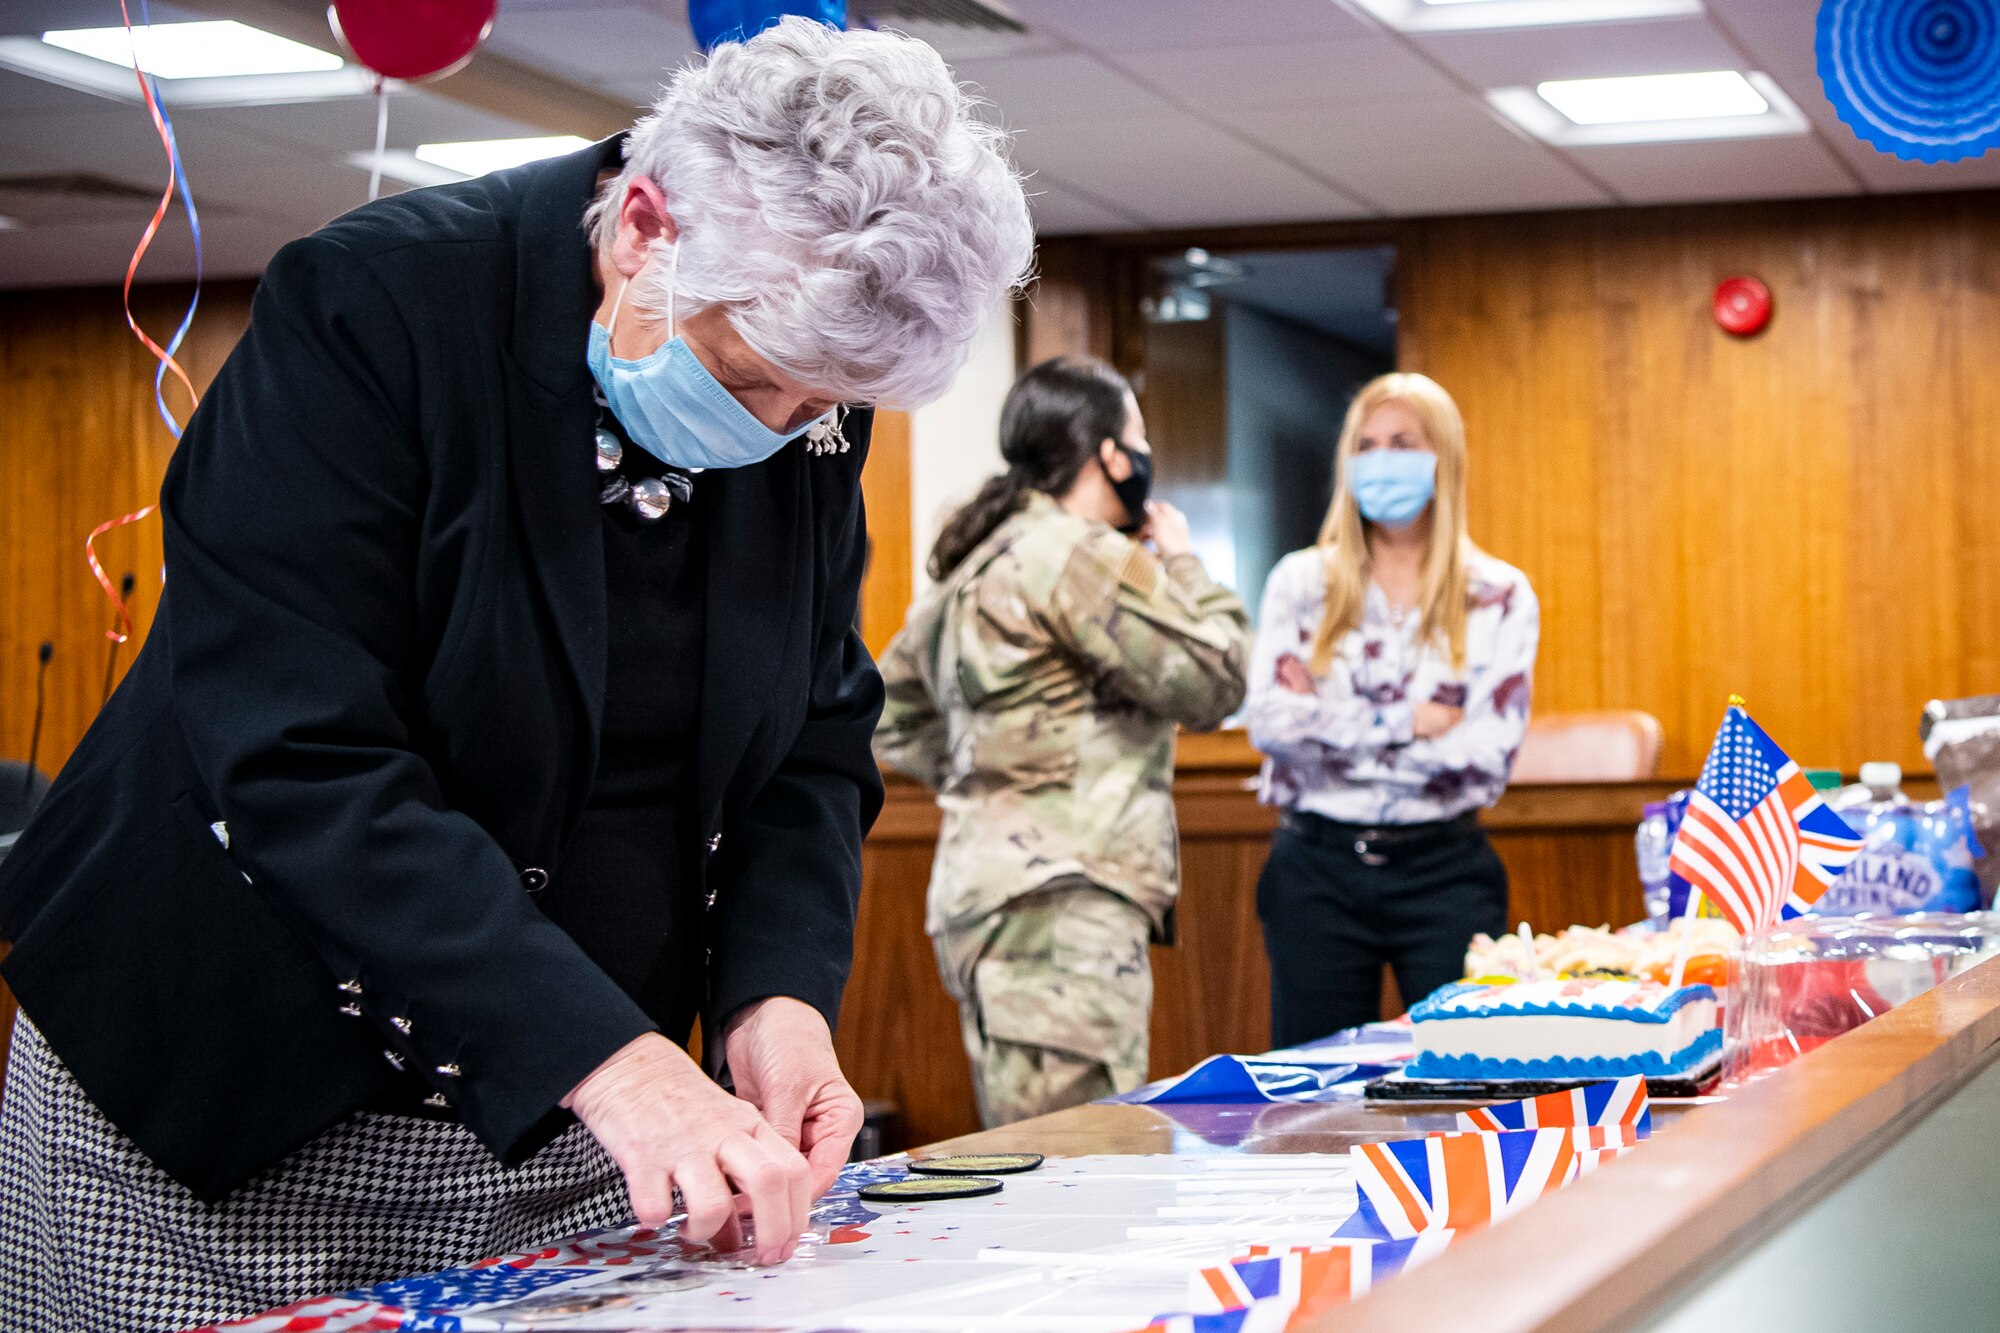 Valerie Lucas, Left, 501st Combat Support Wing, British liaison officer, picks up a coin during a celebration at RAF Alconbury, England, April 23, 2021. The 501 CSW/JA office celebrated Mrs. Lucas for her 60 years of service as the British liaison officer at RAF Alconbury. (U.S. Air Force photo by Senior Airman Eugene Oliver)